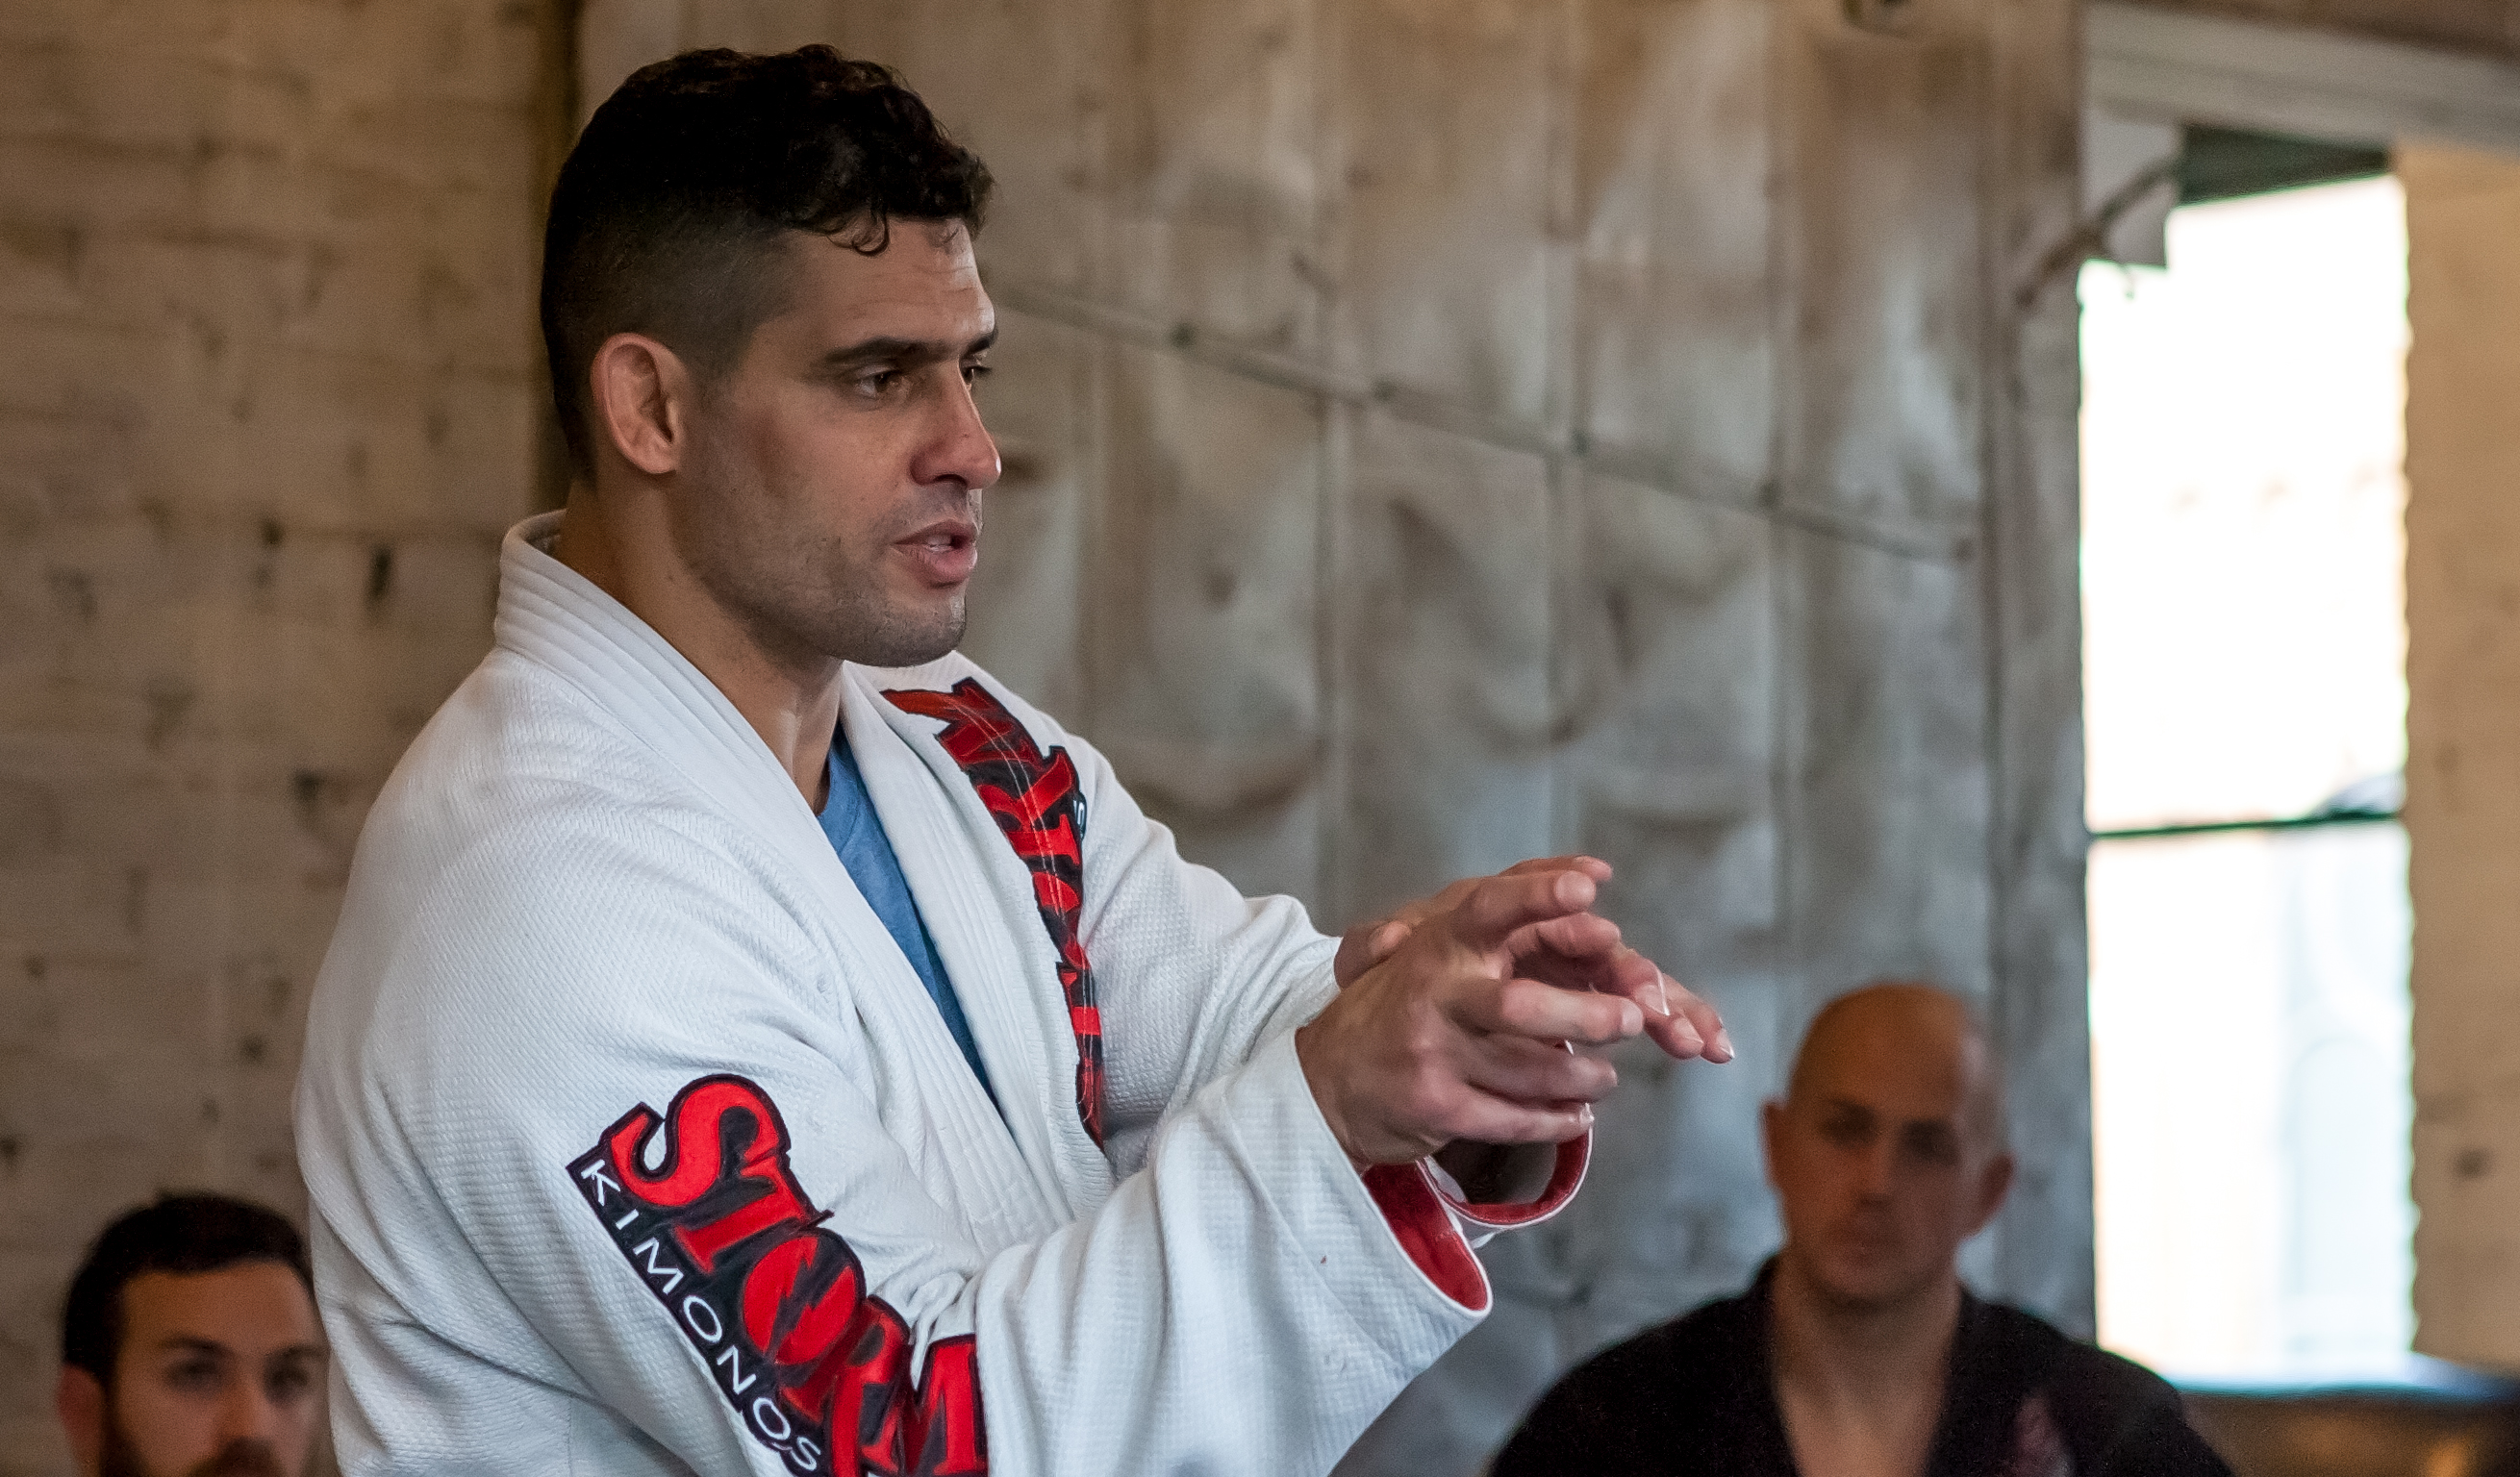 Daniel Gracie on building YOUR game in Jiu Jitsu , Loyalty, Teams, and BJJ Business vs Lifestyle